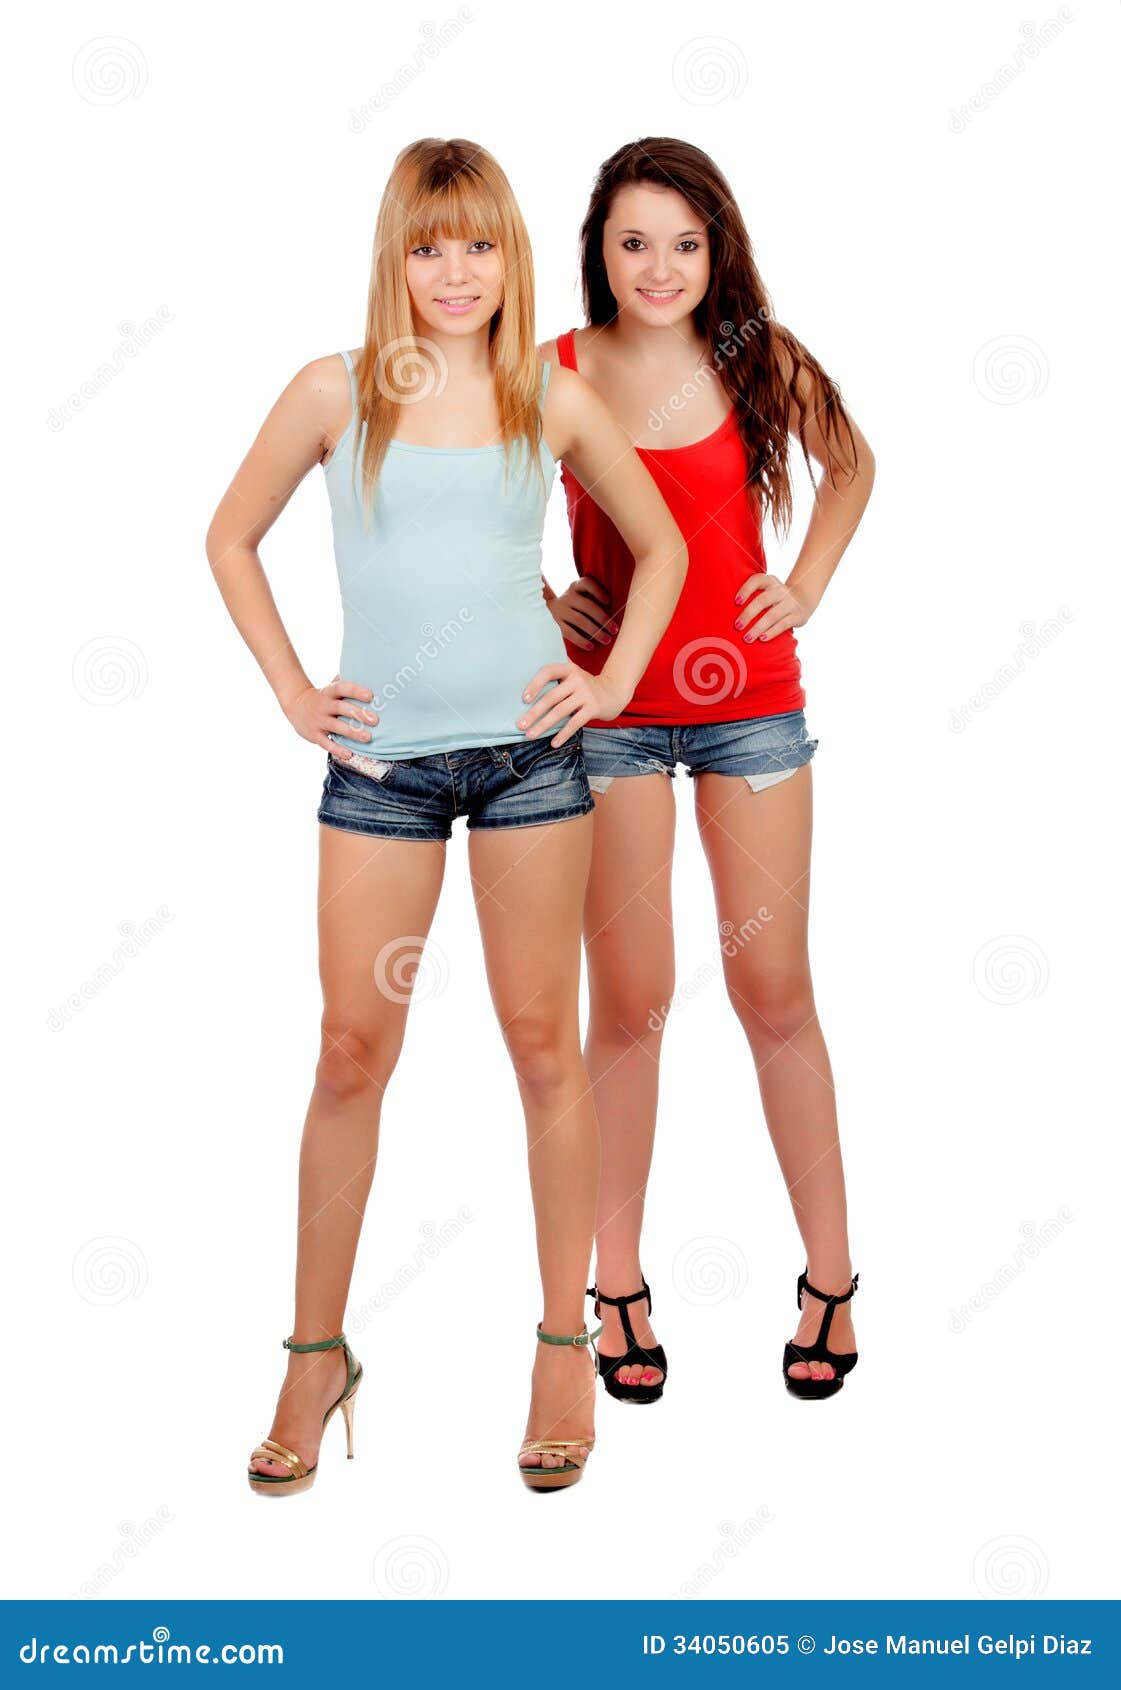 Two Teen Sisters with Jeans Shorts Stock Image - Image of affection,  relationship: 34050605